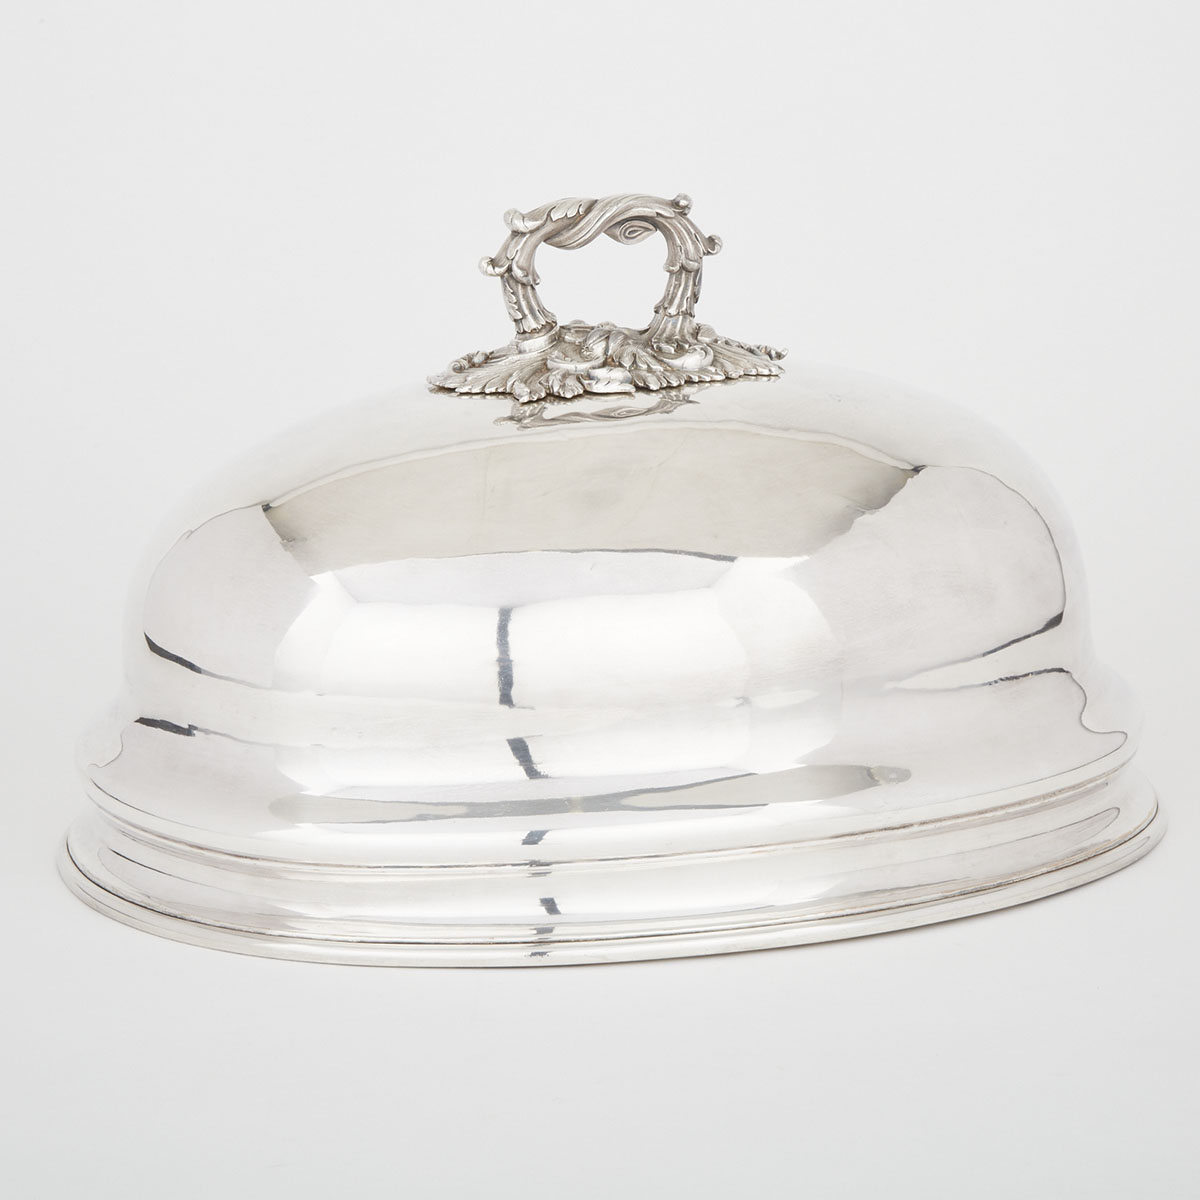 Old Sheffield Plate Oval Meat Dish Cover, T. & J. Creswick, c.1830